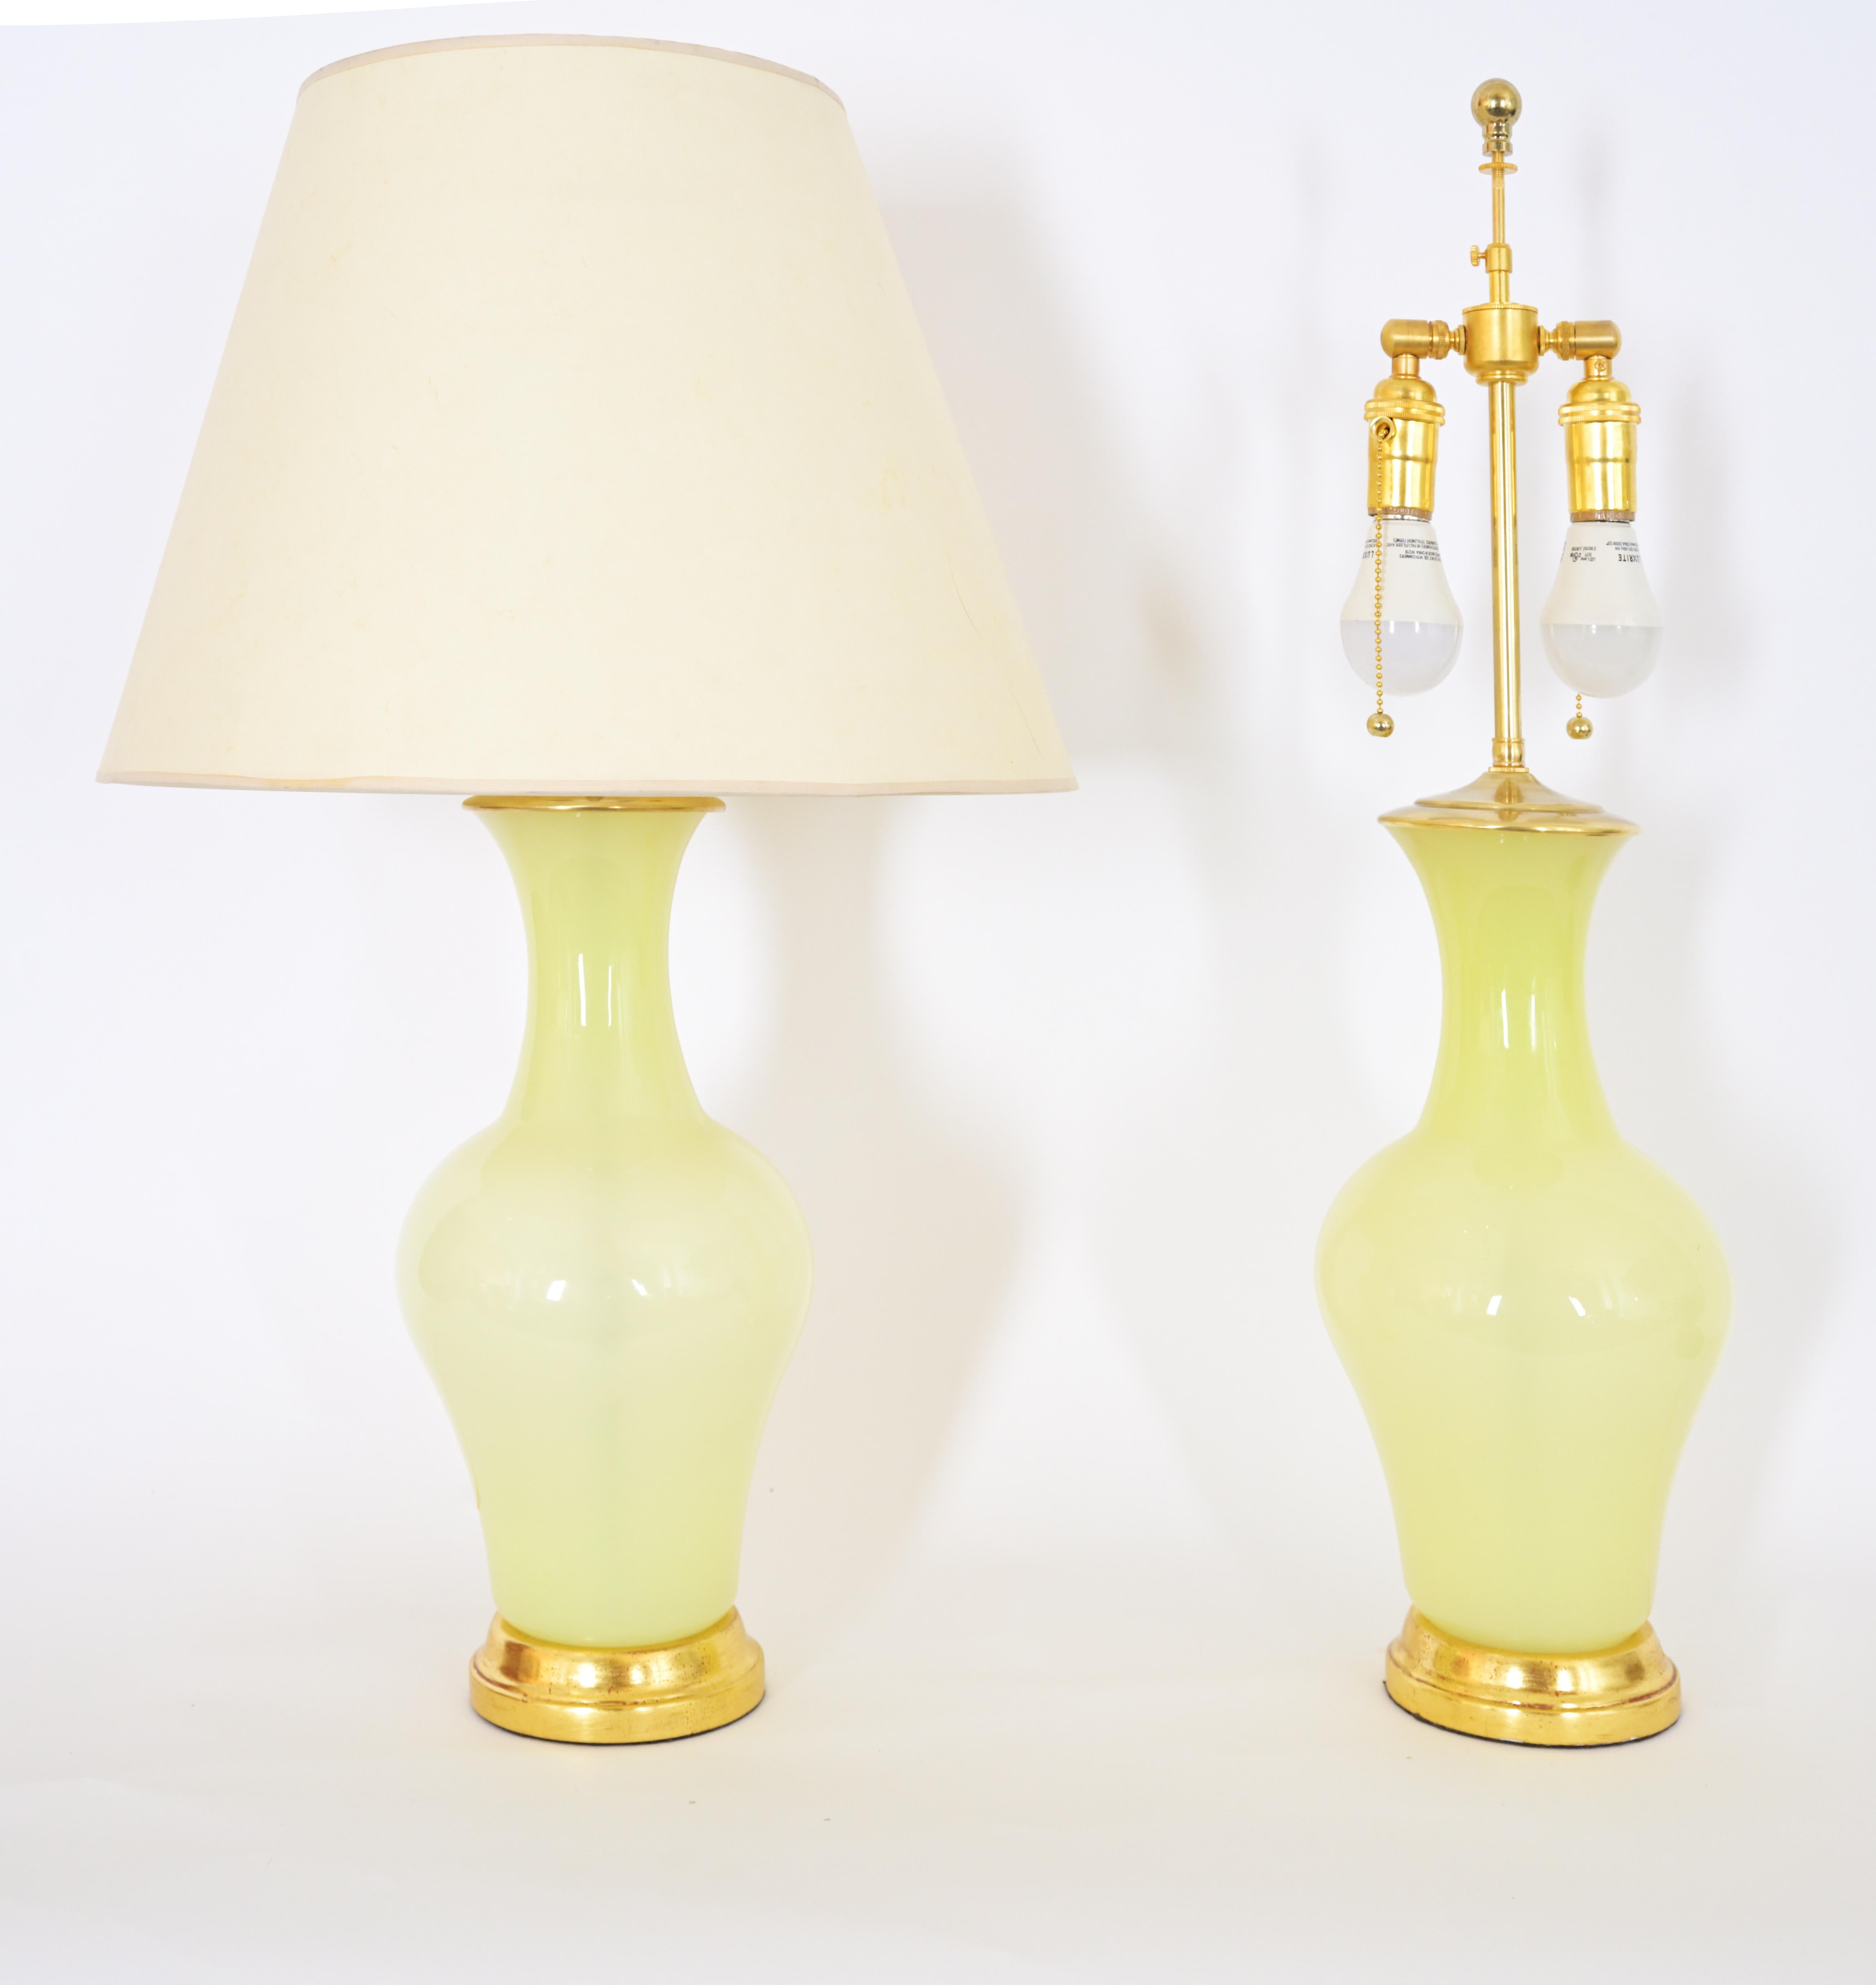 Contemporary Pair of Pale Citrine Murano Glass Table Lamps by David Duncan Studio